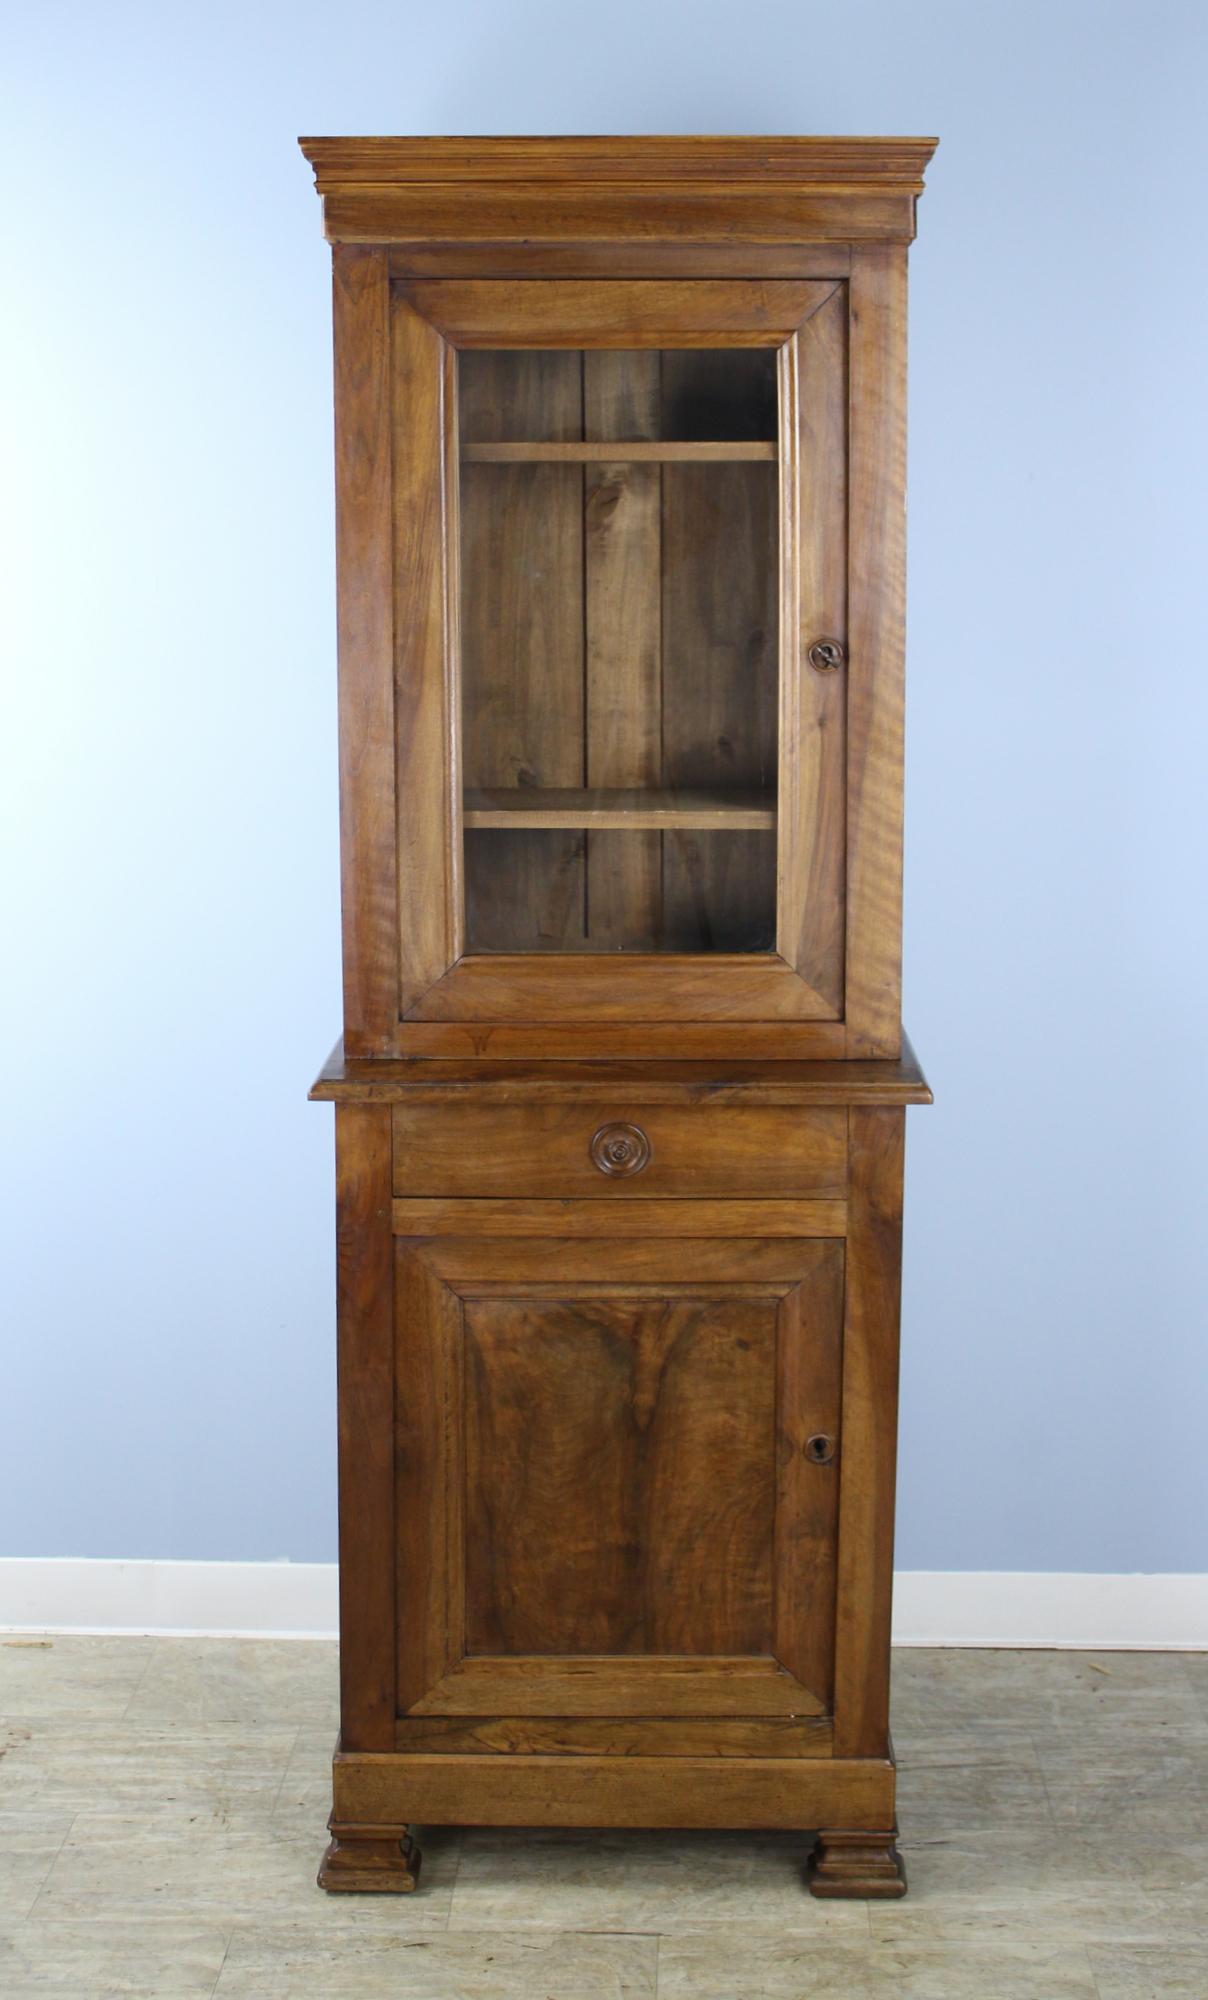 An elegant antique walnut vitrine or cupboard, suitable for a variety of purposes and rooms. The walnut has marvelous color and good patina. The top has two adjustable shelves and the hand carved walnut escutcheon closes snugly with the key. Below